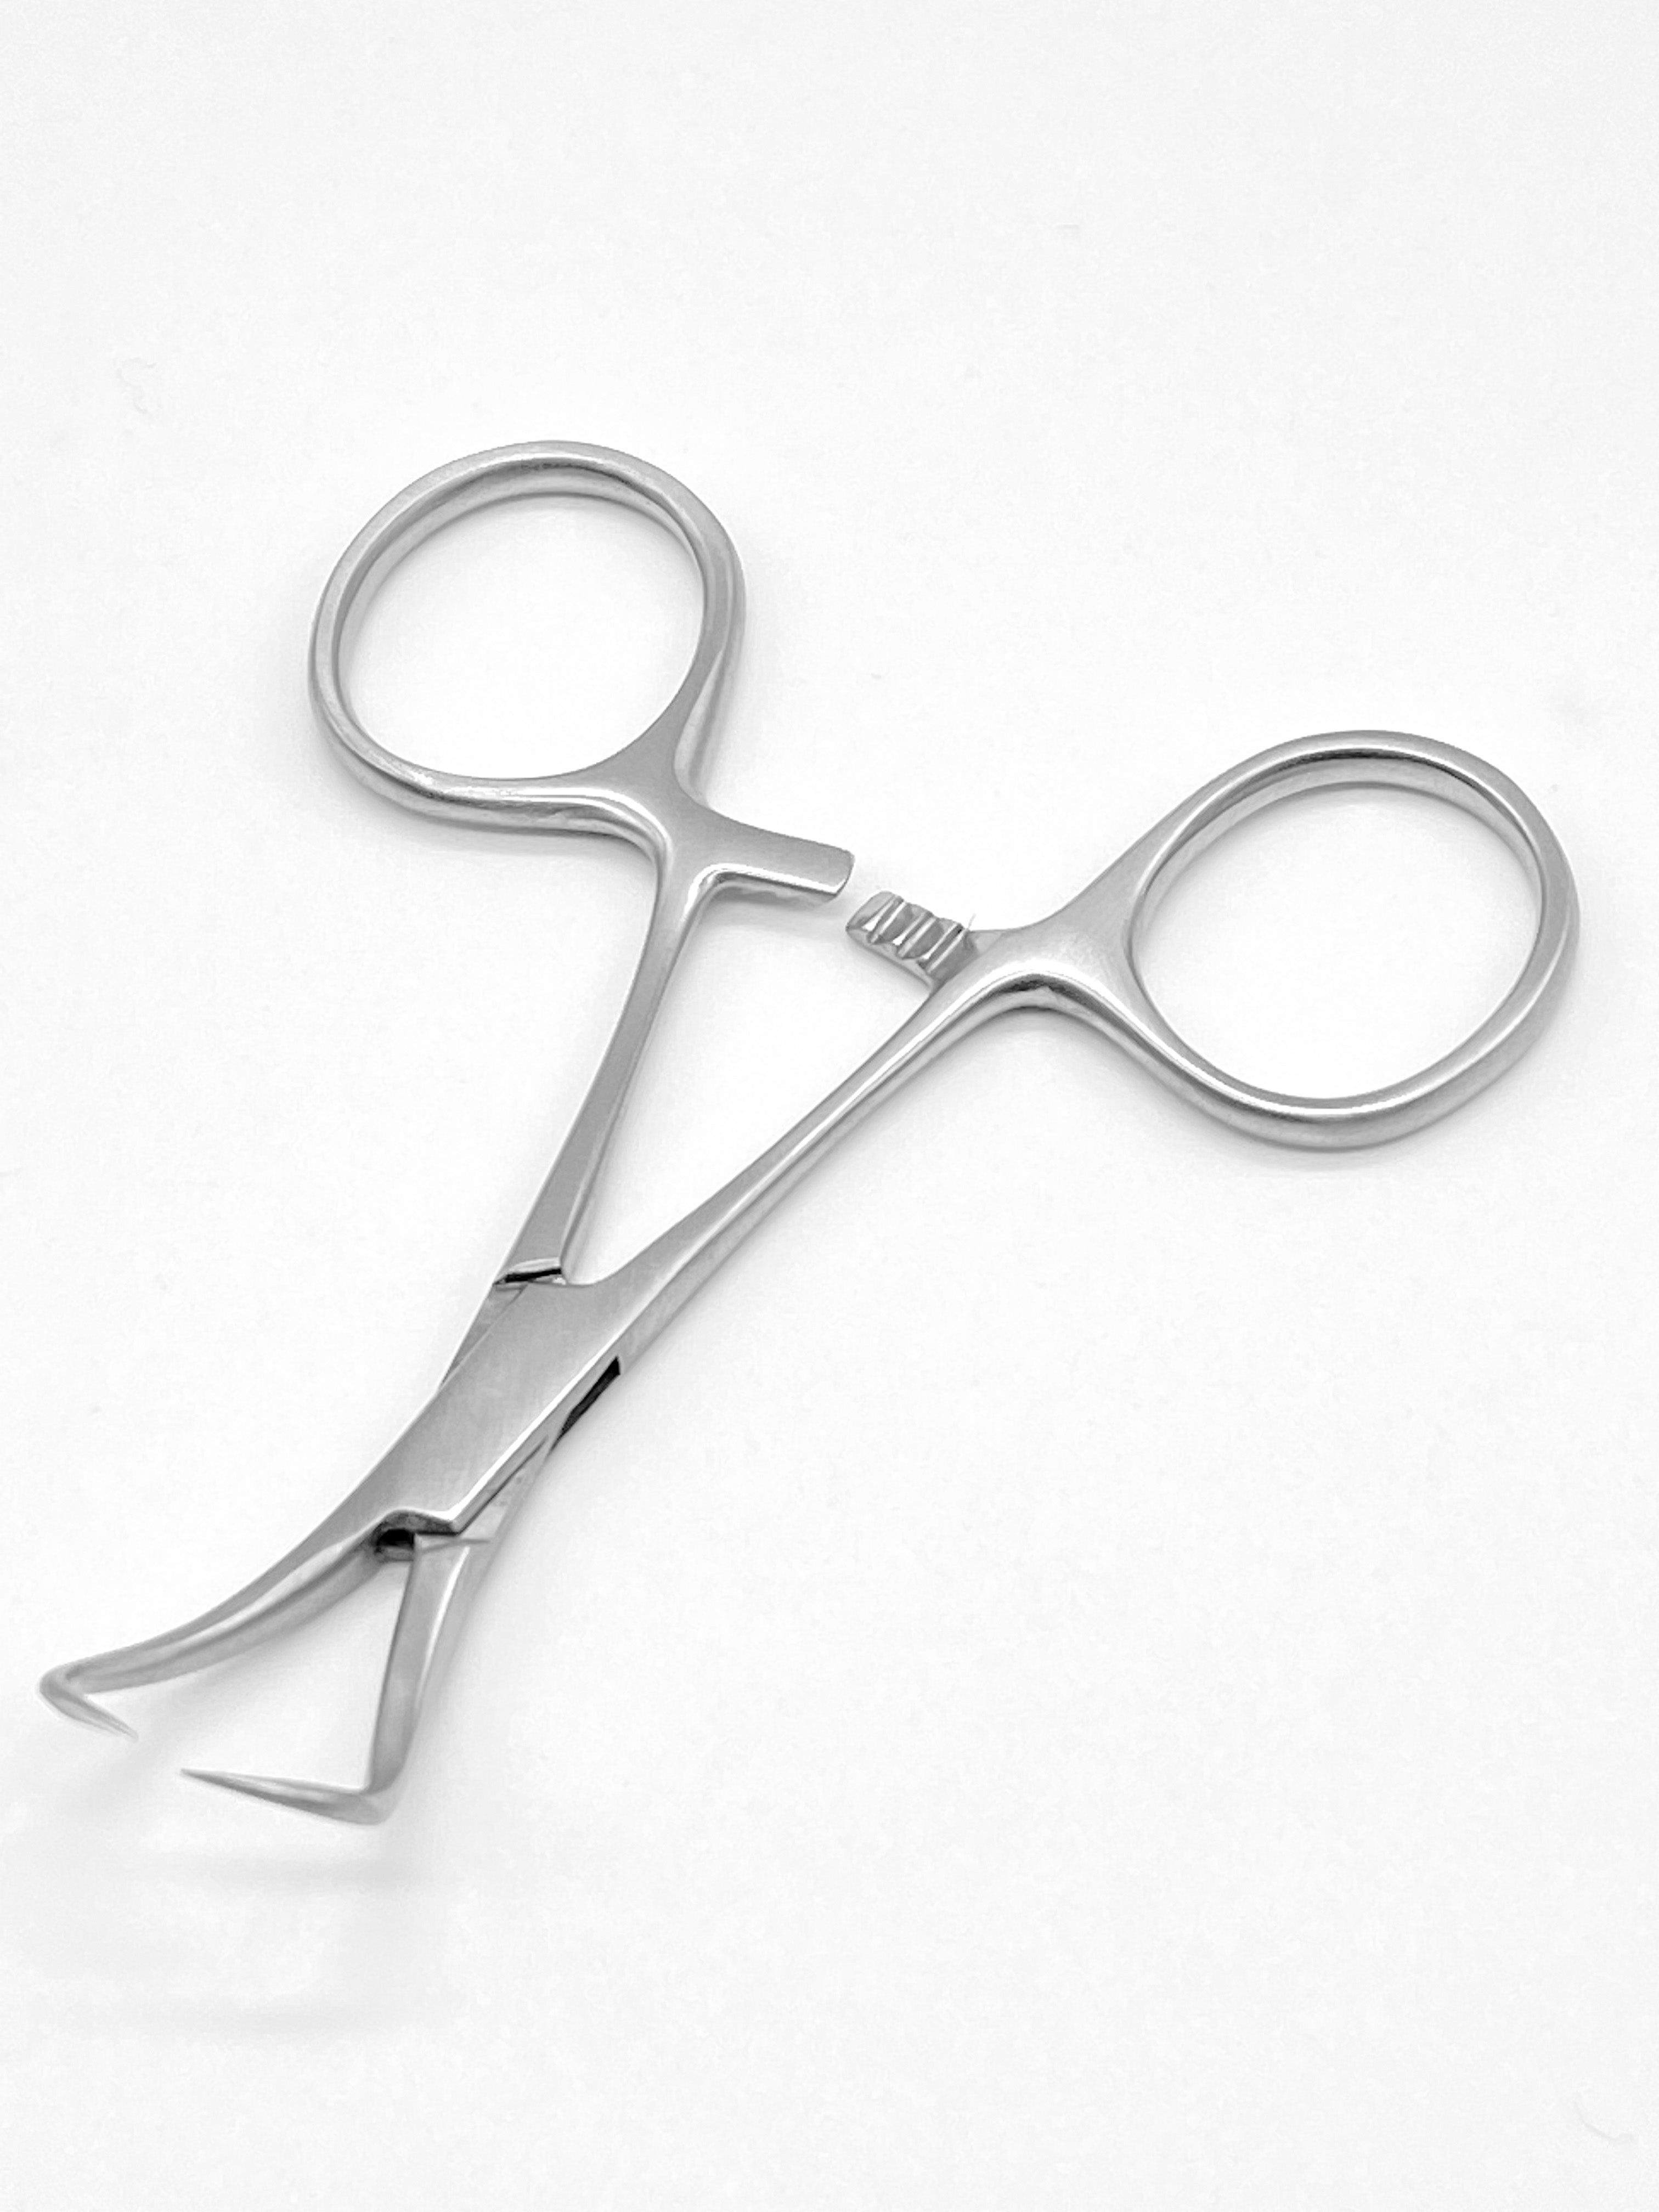 Forceps - Backhaus Towel Clamps - Surgical Podiatry Instruments